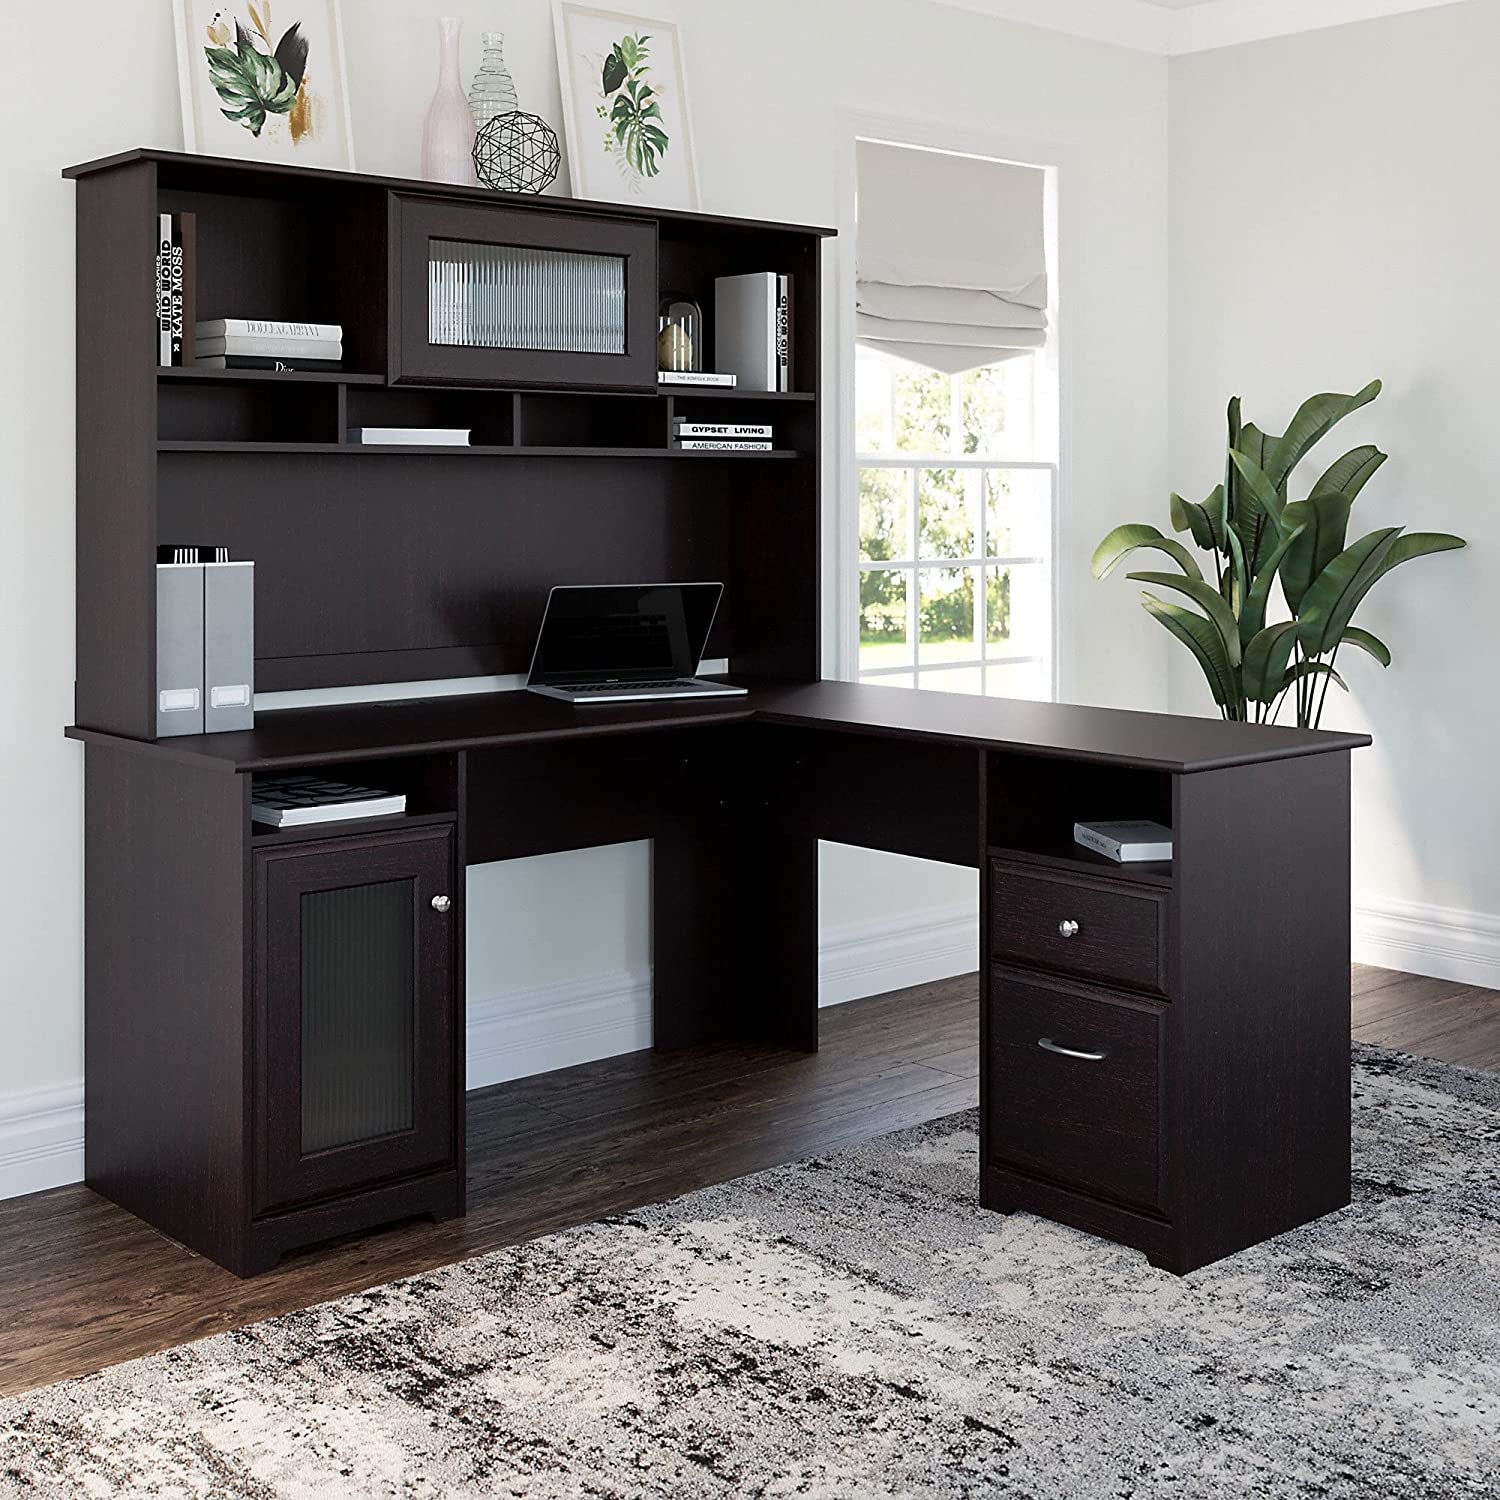 the l-shaped desk with a hutch in 